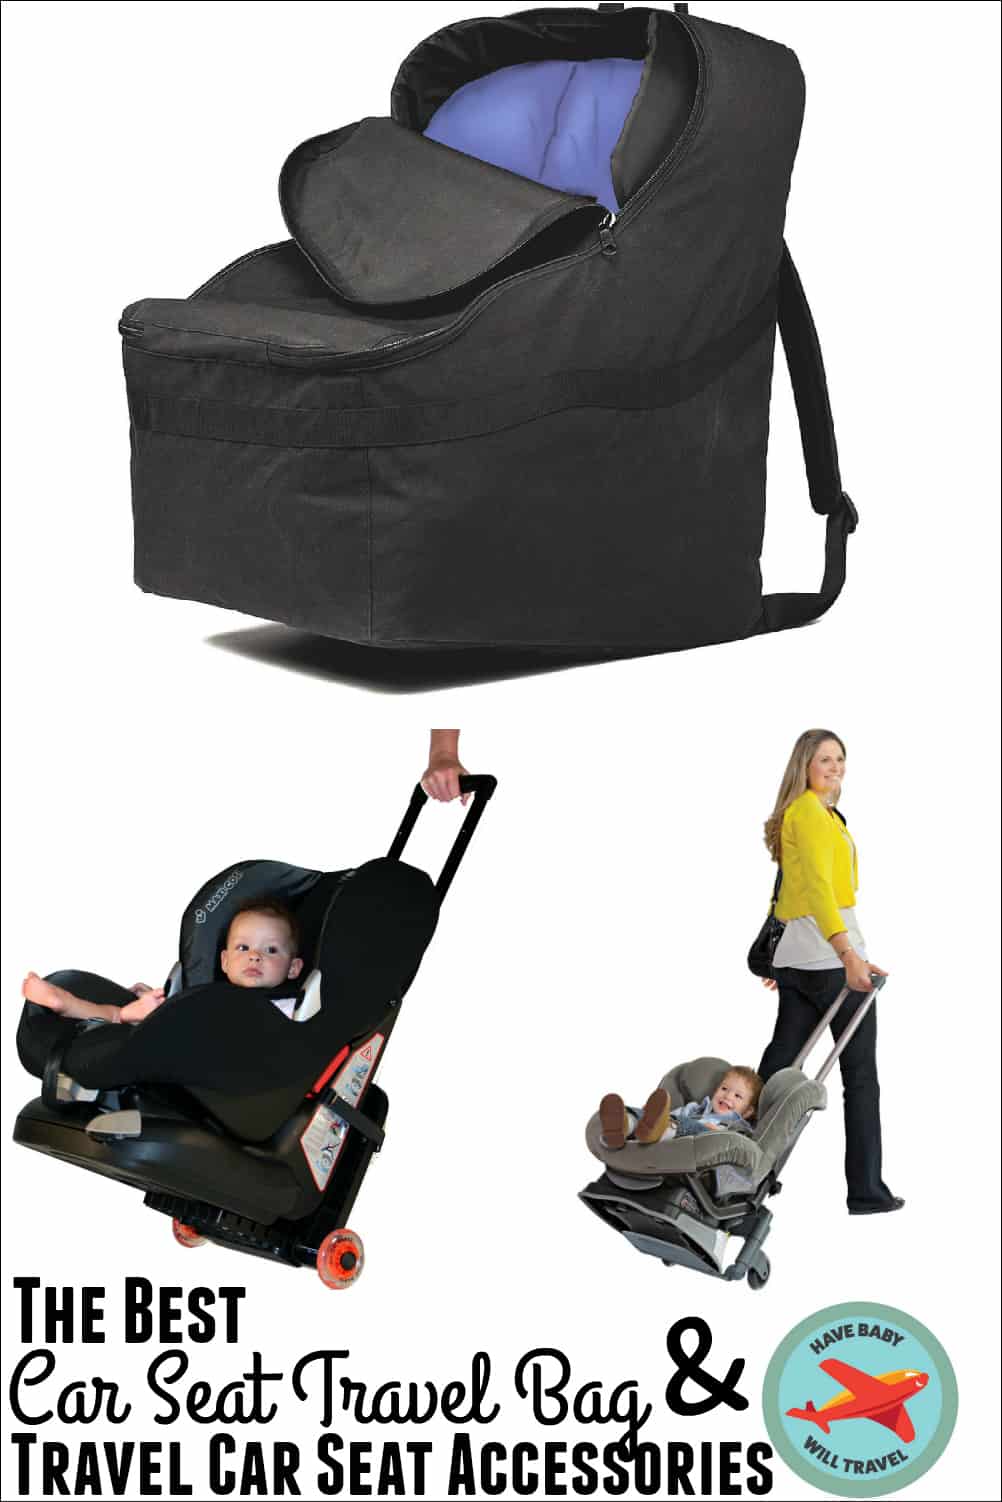 The Best Car Seat Travel Bag & Accessories